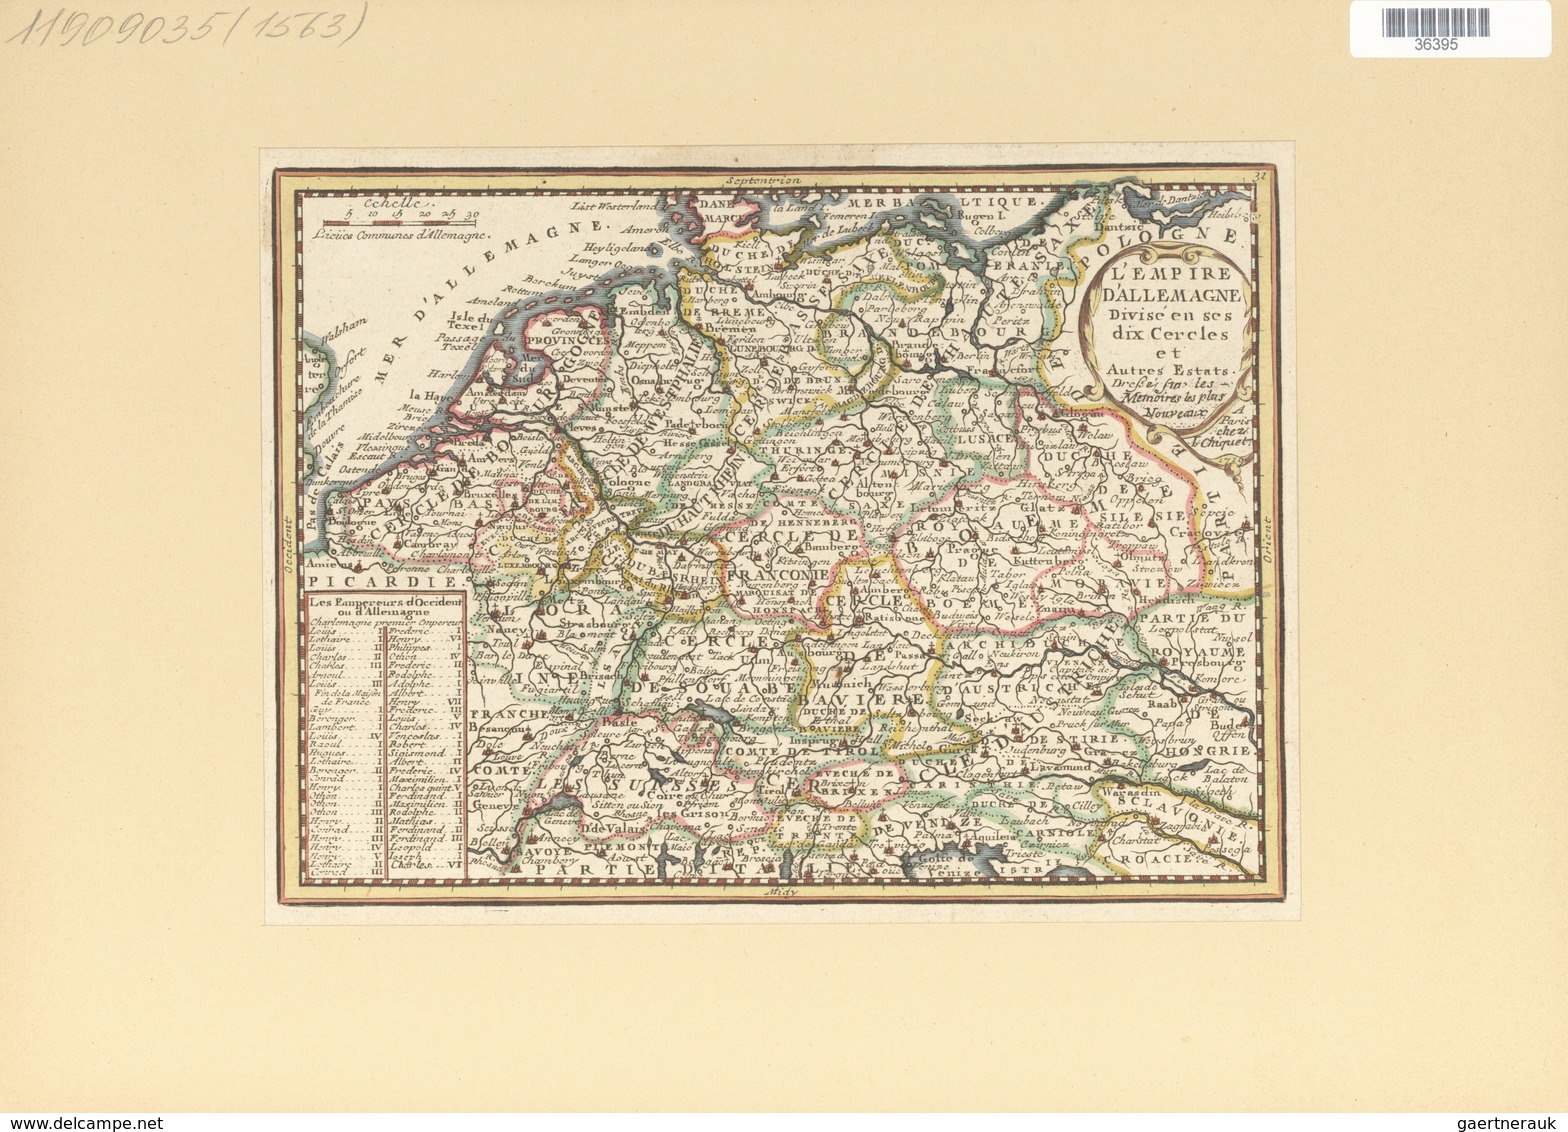 Landkarten Und Stiche: 1719. Map Of The Kingdoms Of Germania From The Low Countries To Hungary. From - Geographie